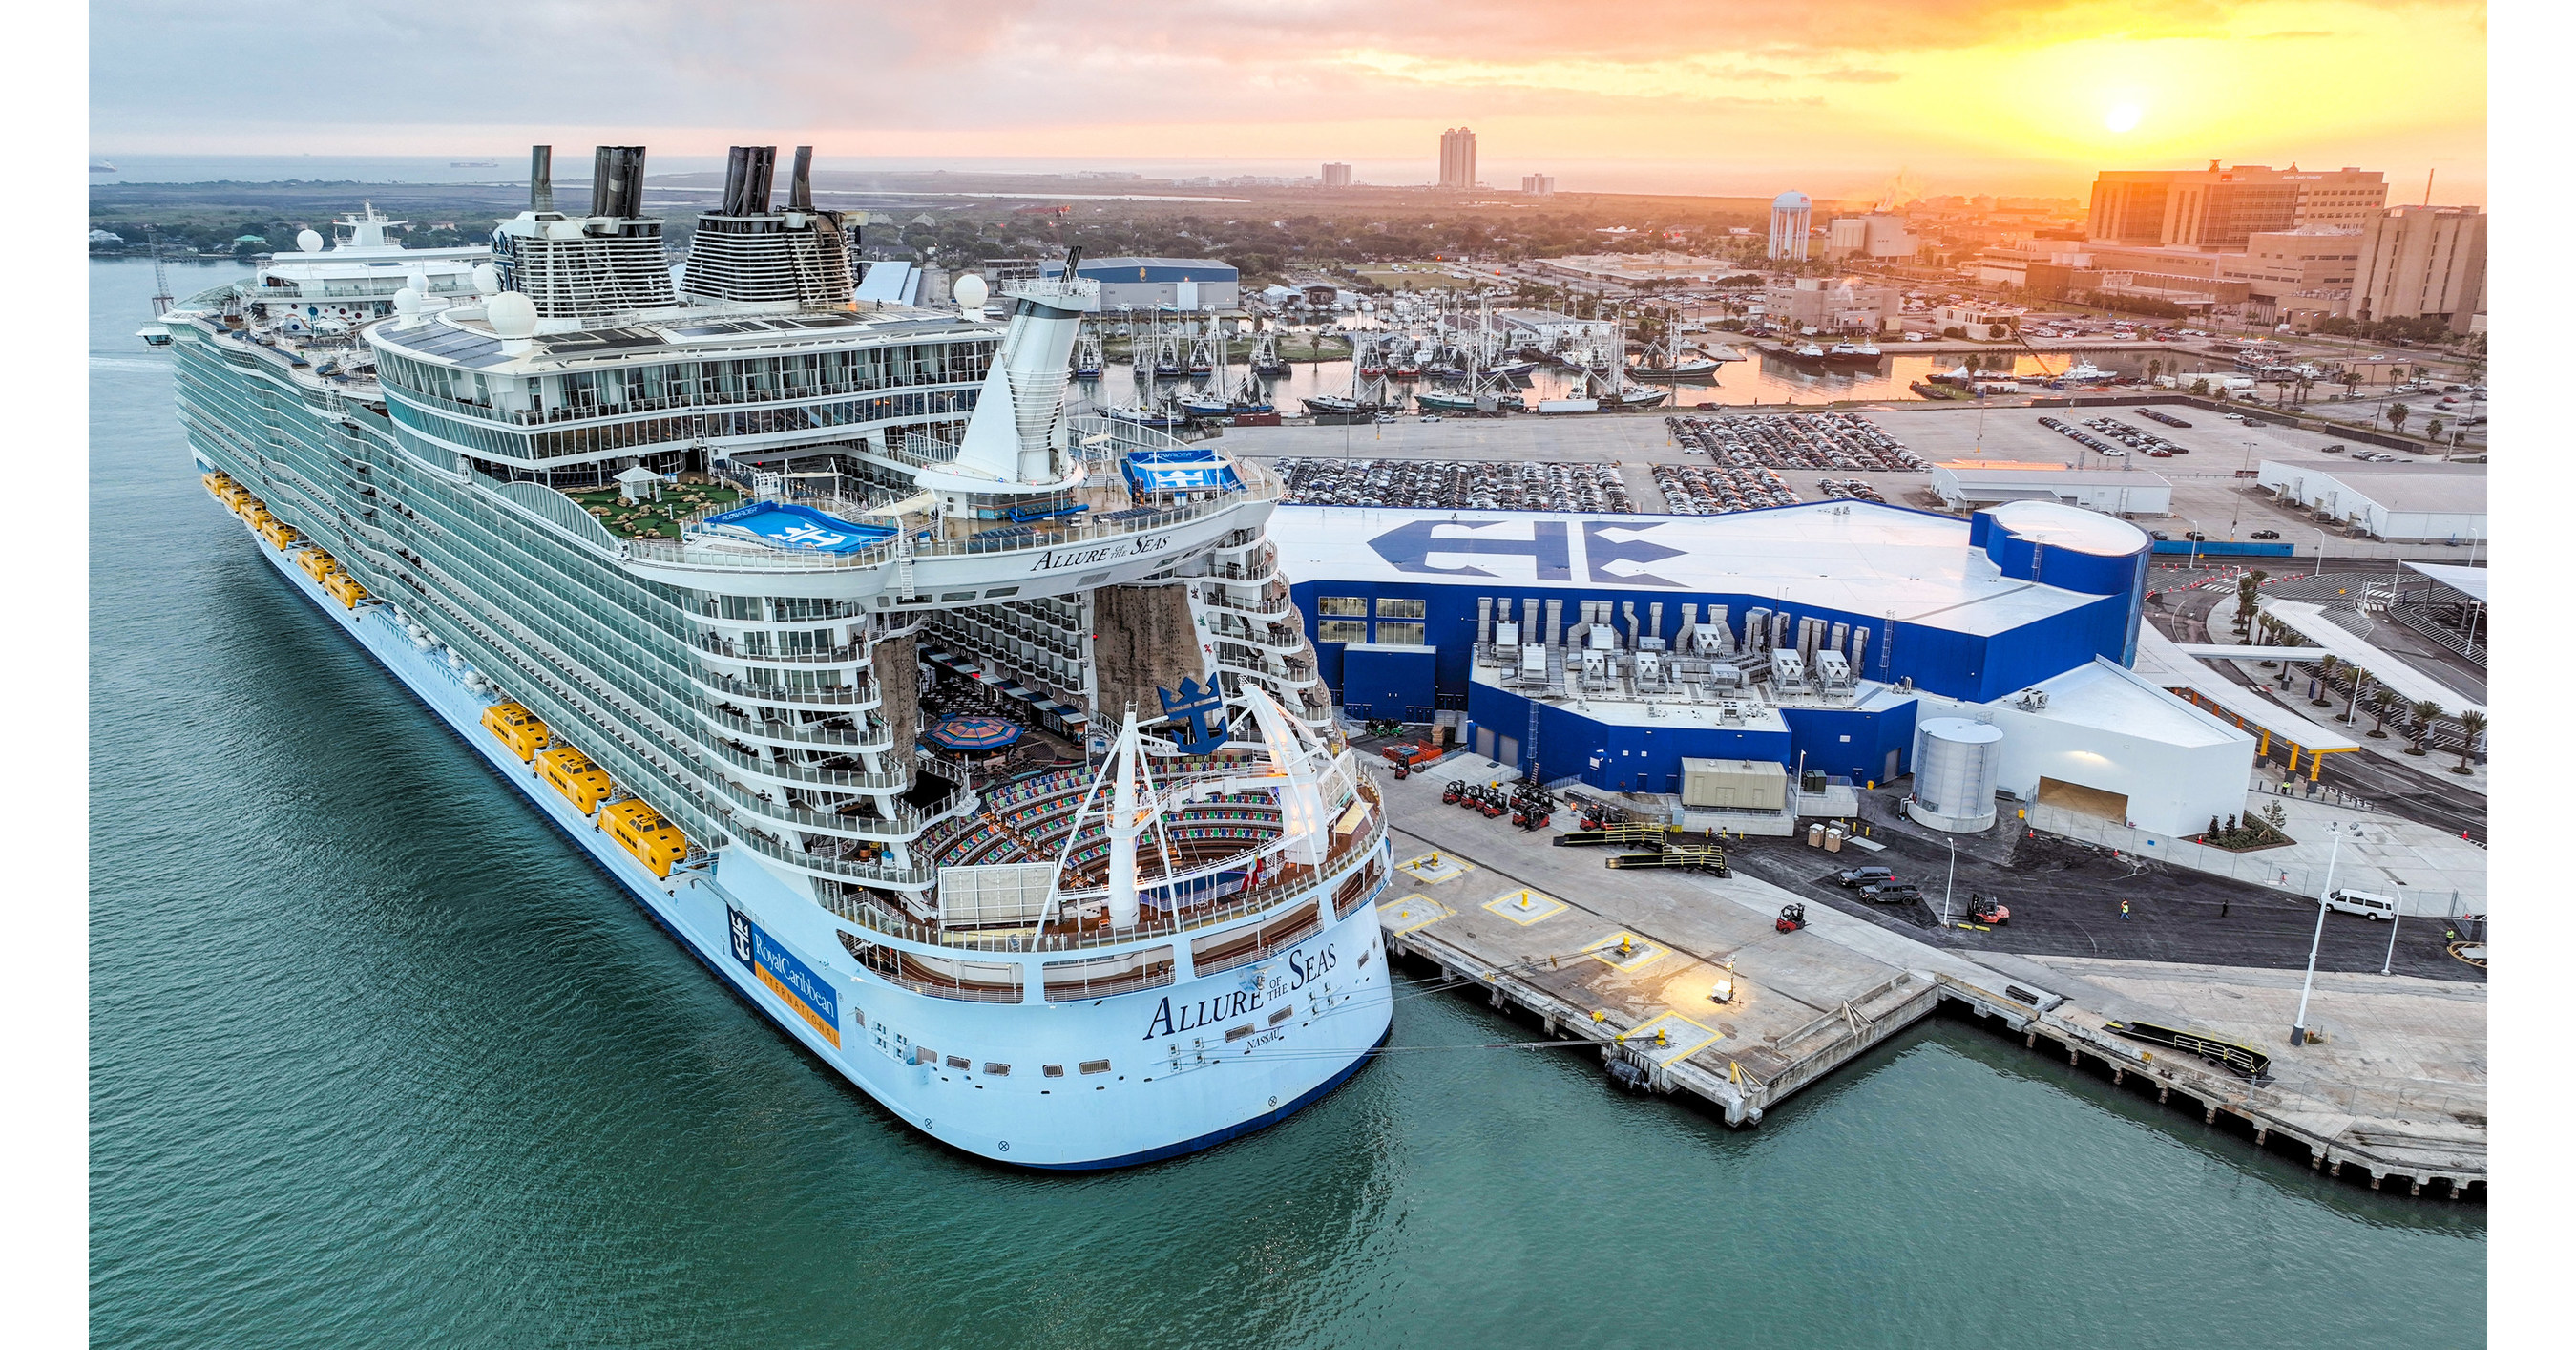 NEW ROYAL CARIBBEAN TERMINAL OPENS, LARGEST CRUISE SHIP AND